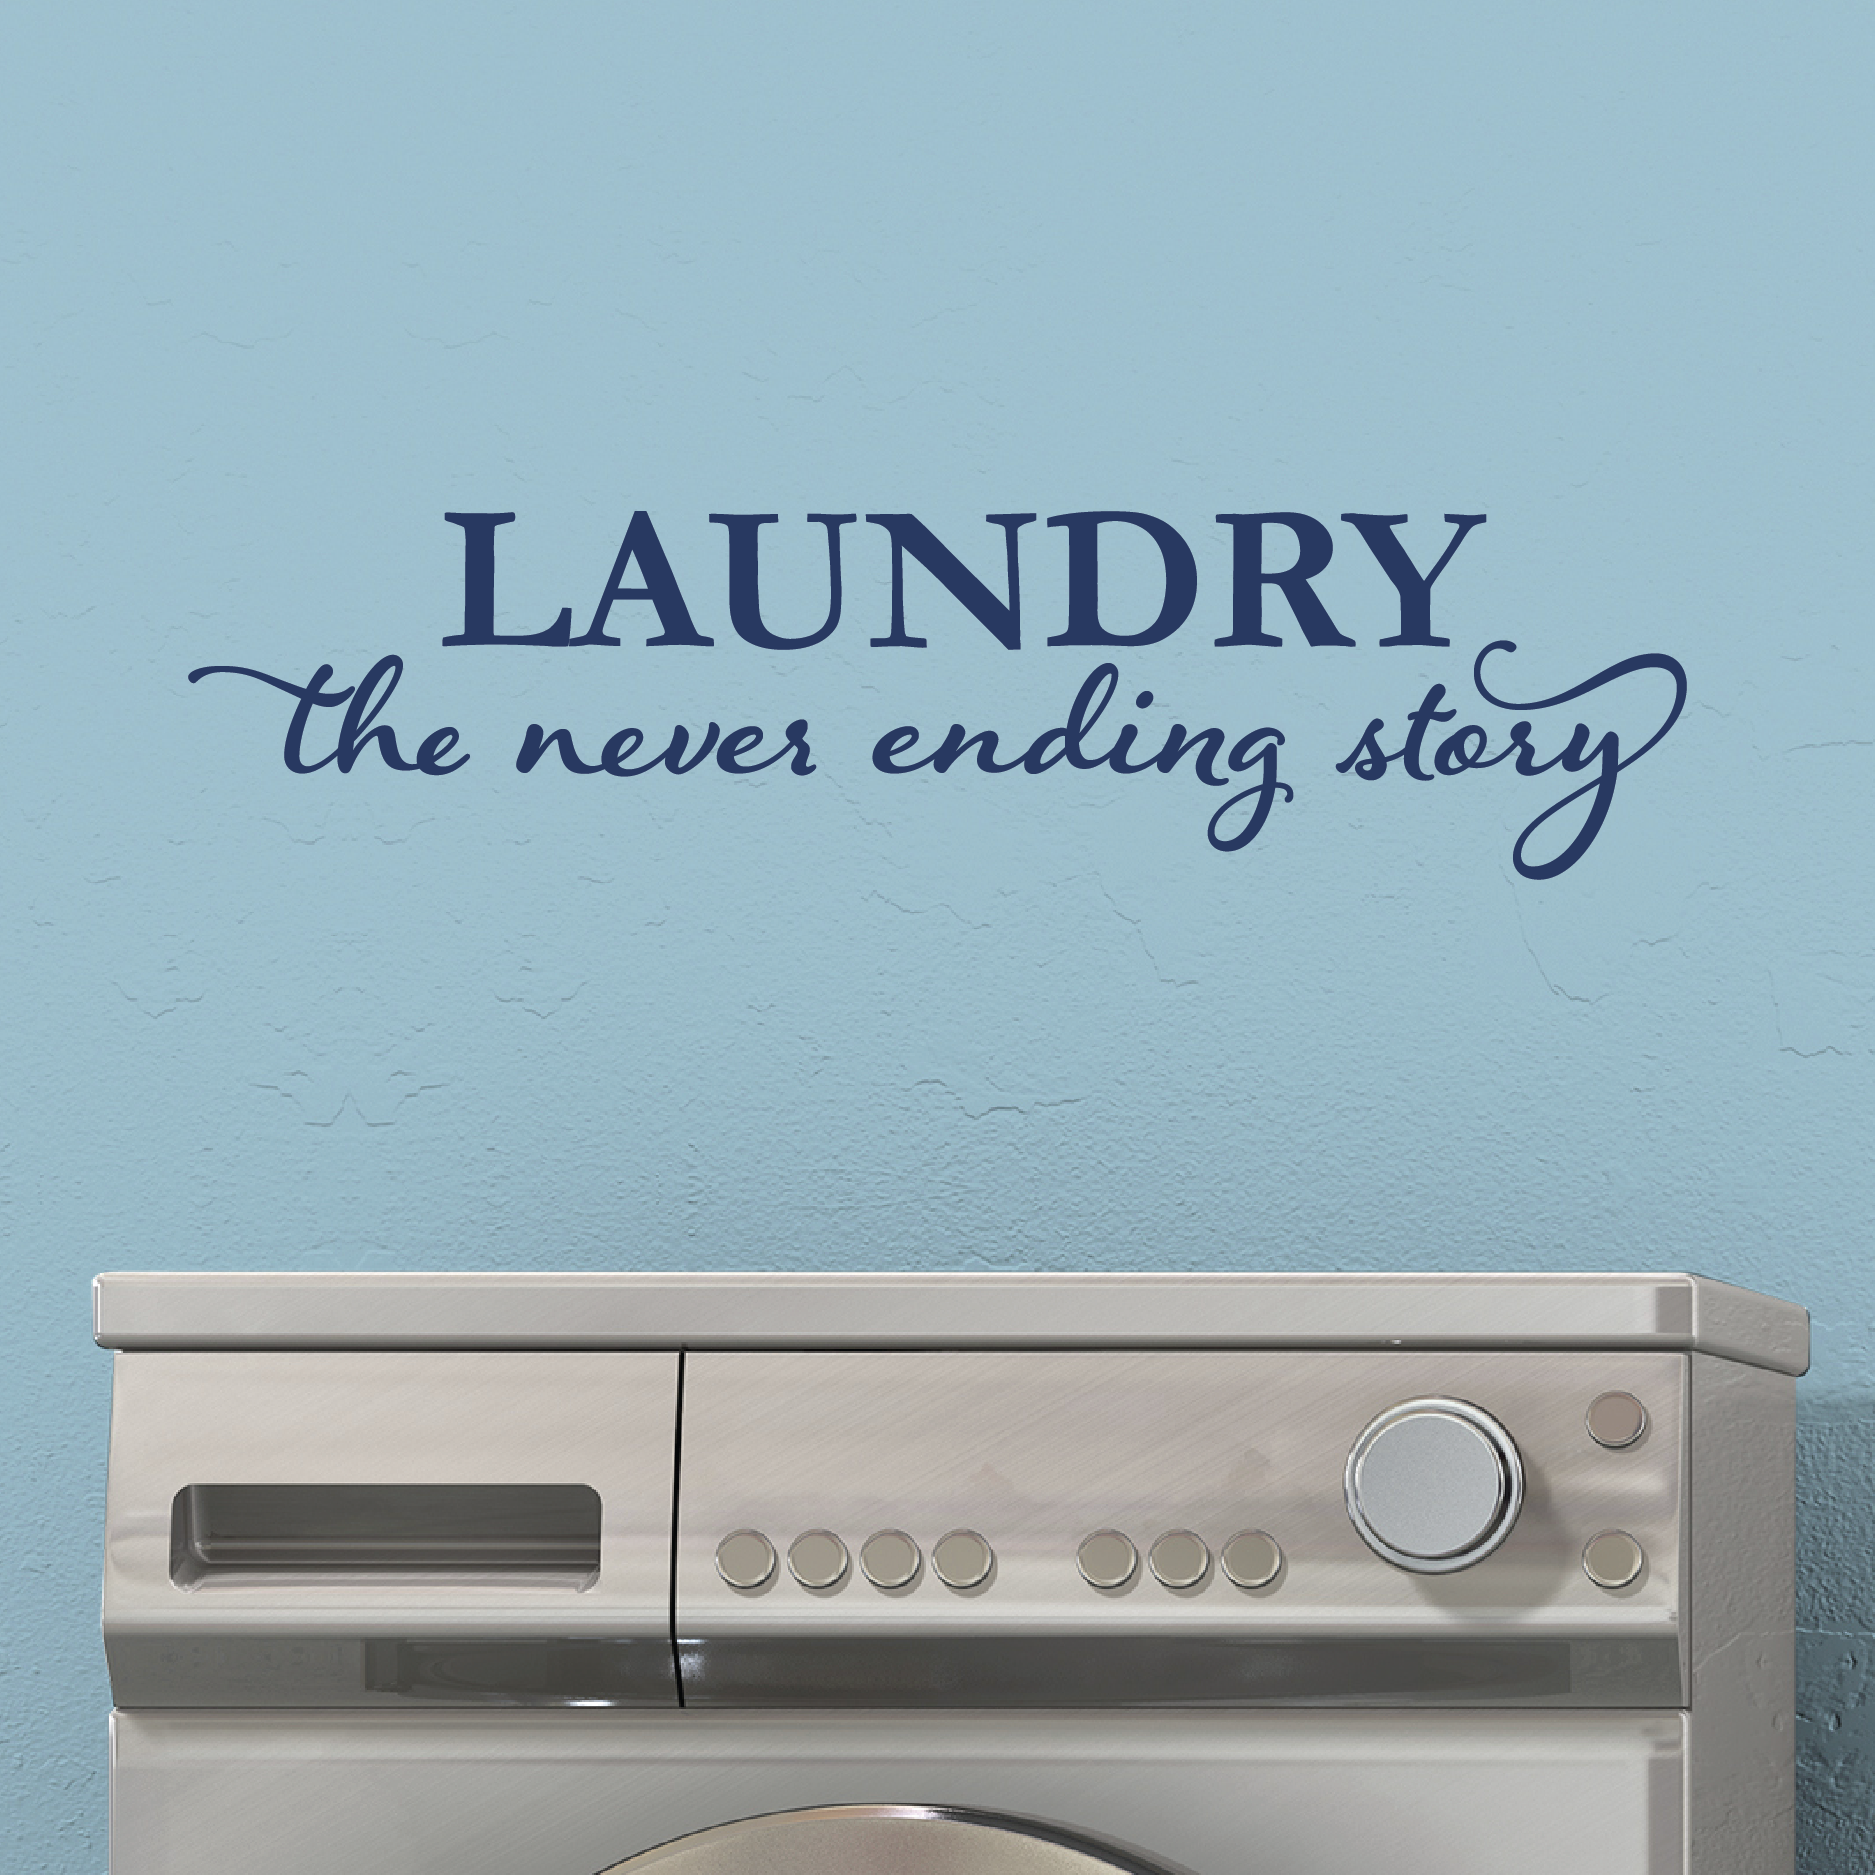 Laundry Confessions: I Almost Never Wash My Clothes, Here's Why